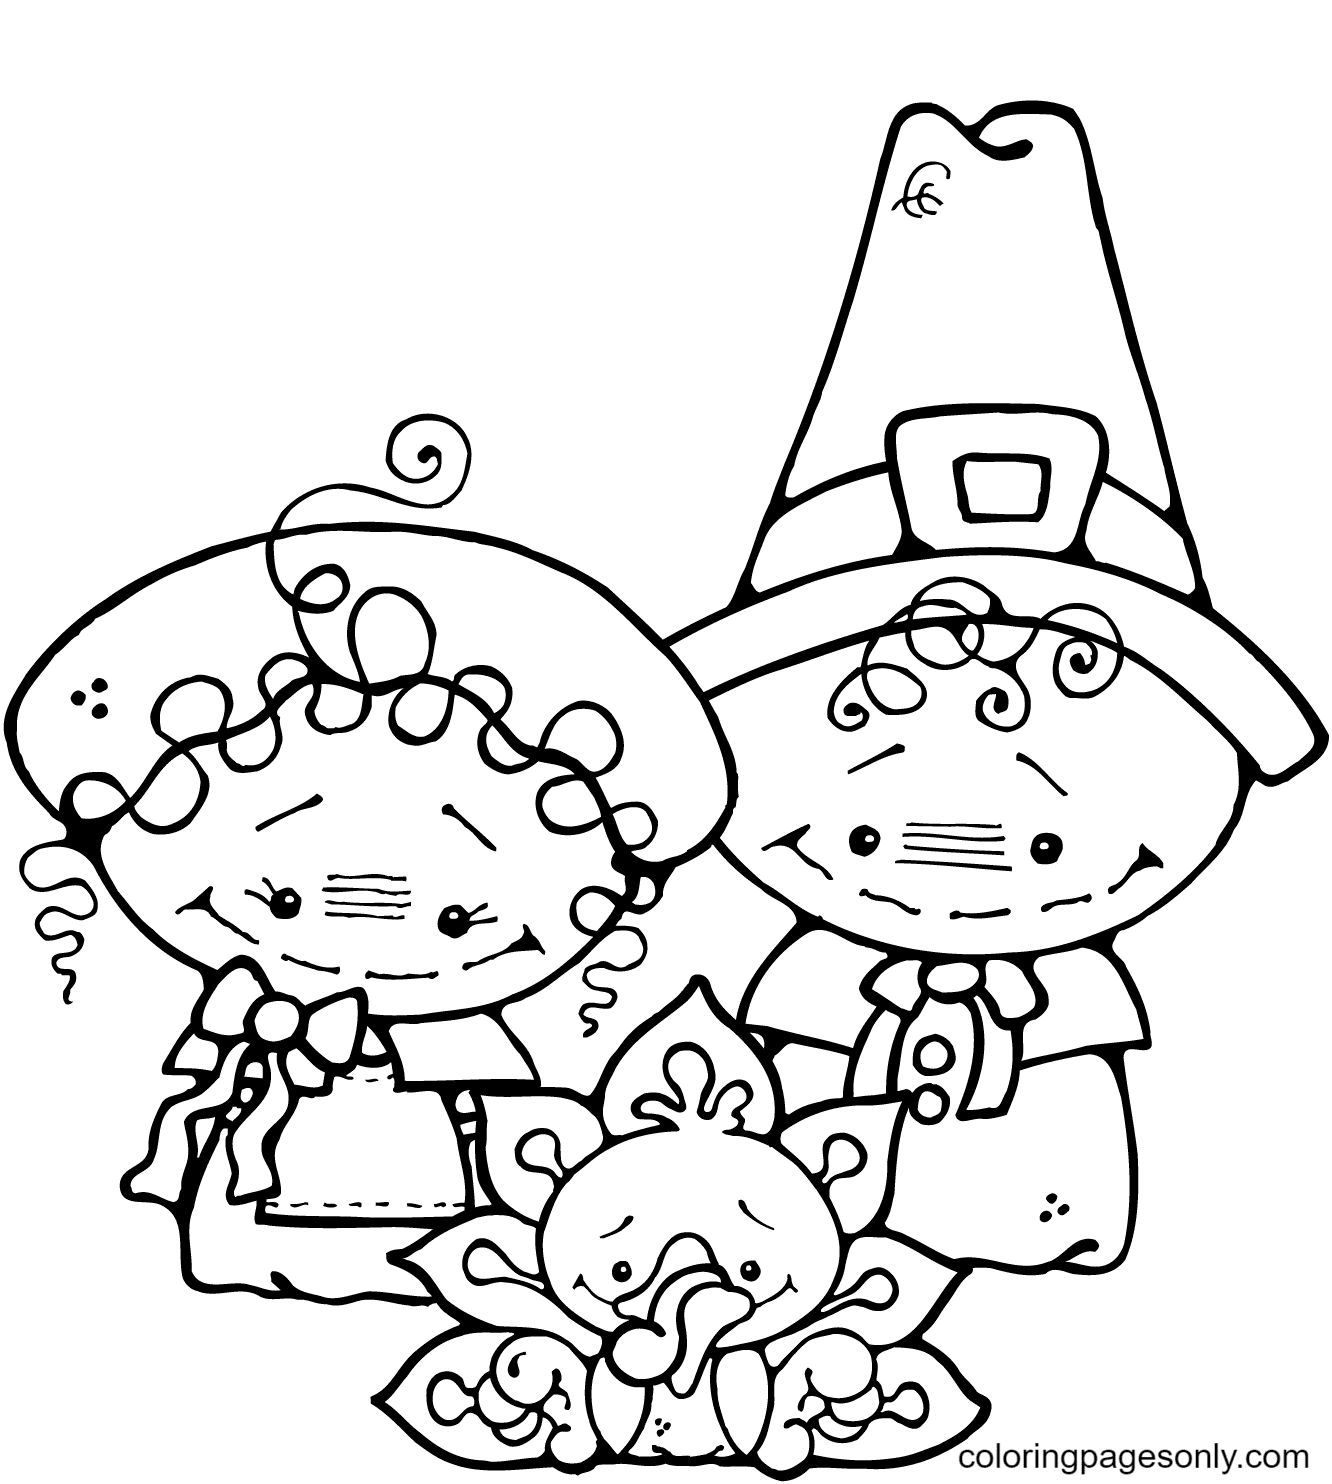 Pilgrim Boy and Girl with Turkey Coloring Page